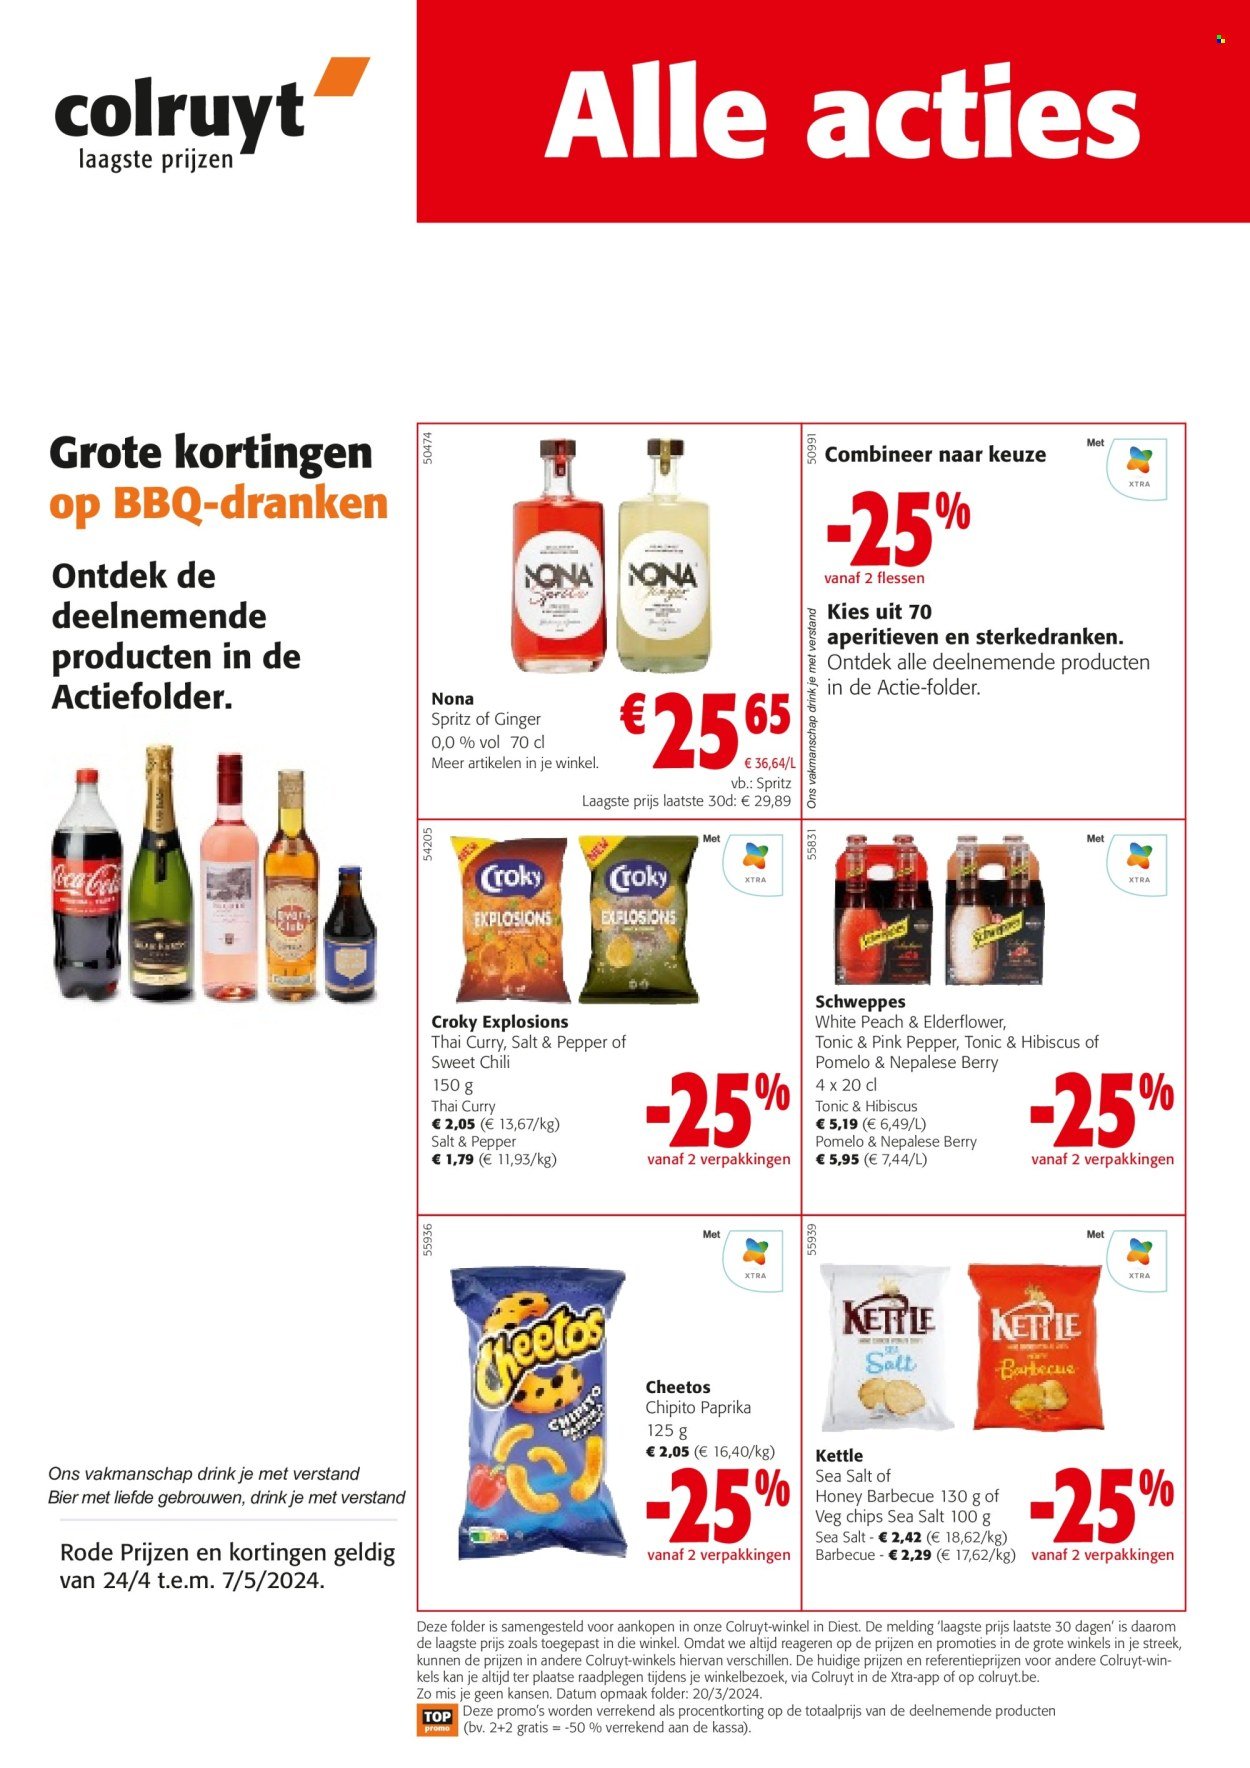 thumbnail - Colruyt-aanbieding - 24/04/2024 - 07/05/2024 -  producten in de aanbieding - bier, alcohol, paprika, cheetos, chips, curry, sweet chili sauce, BBQ, Schweppes, fles. Pagina 1.